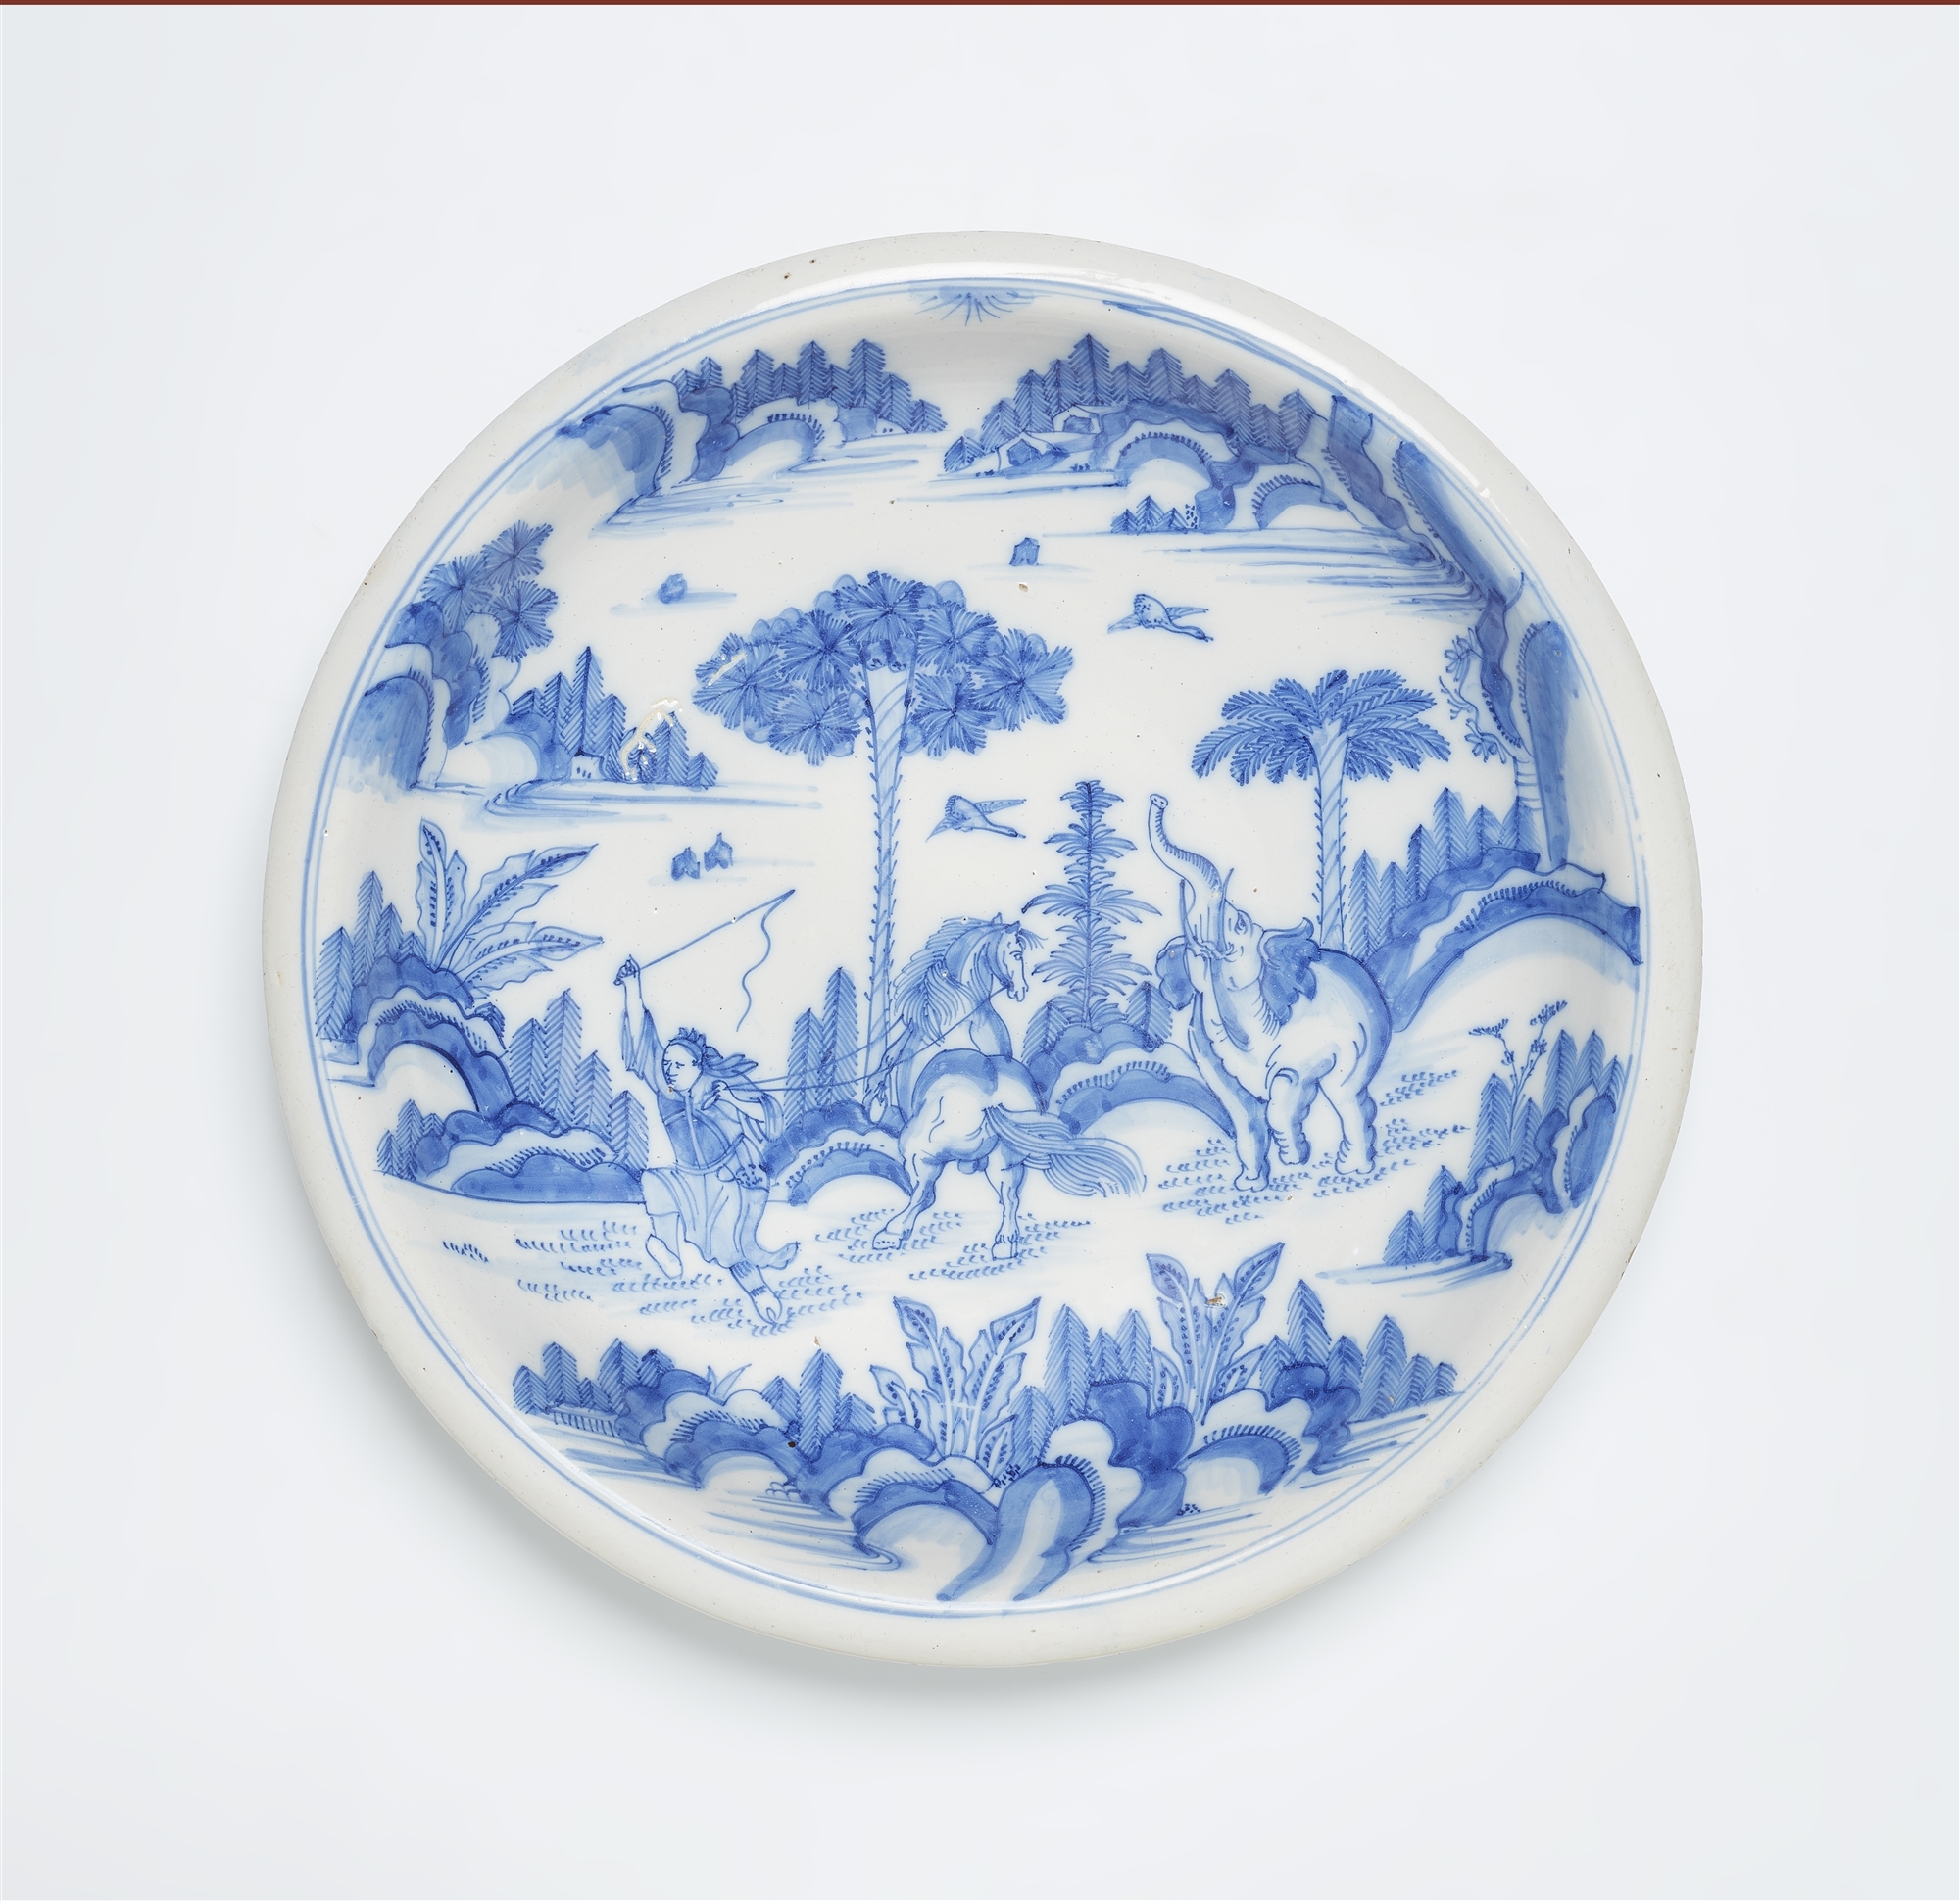 A faience dish with Chinoiserie motifs and an elephant